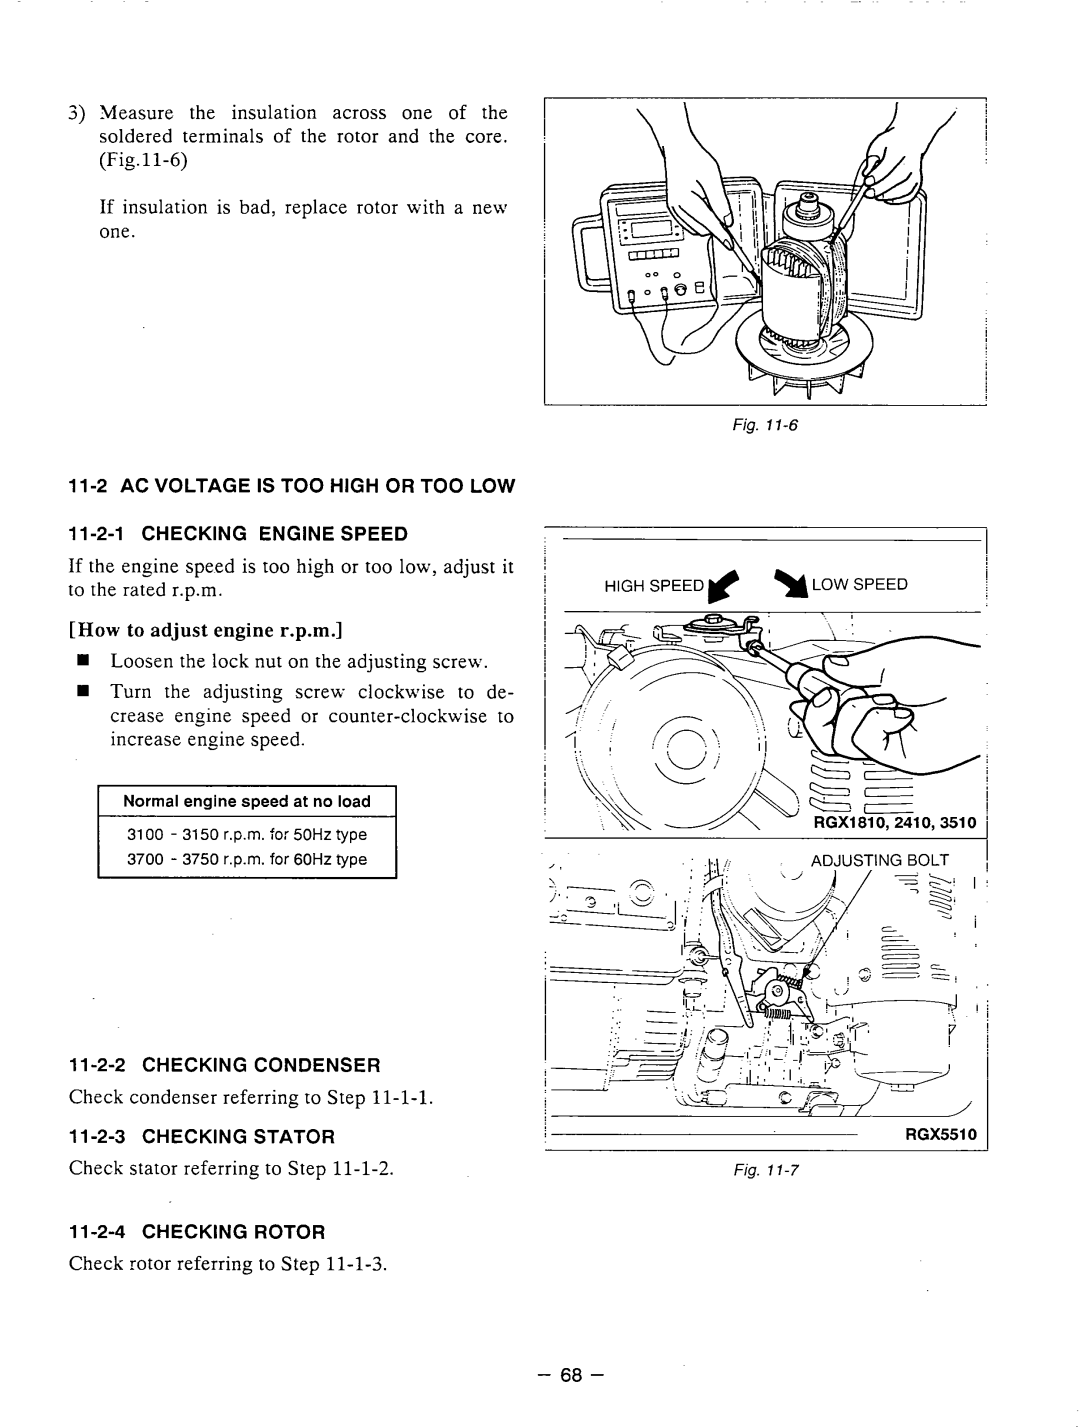 Subaru Robin Power Products RGX3510 manual How to adjust engine r.p.m.1, Check stator referring to Step 